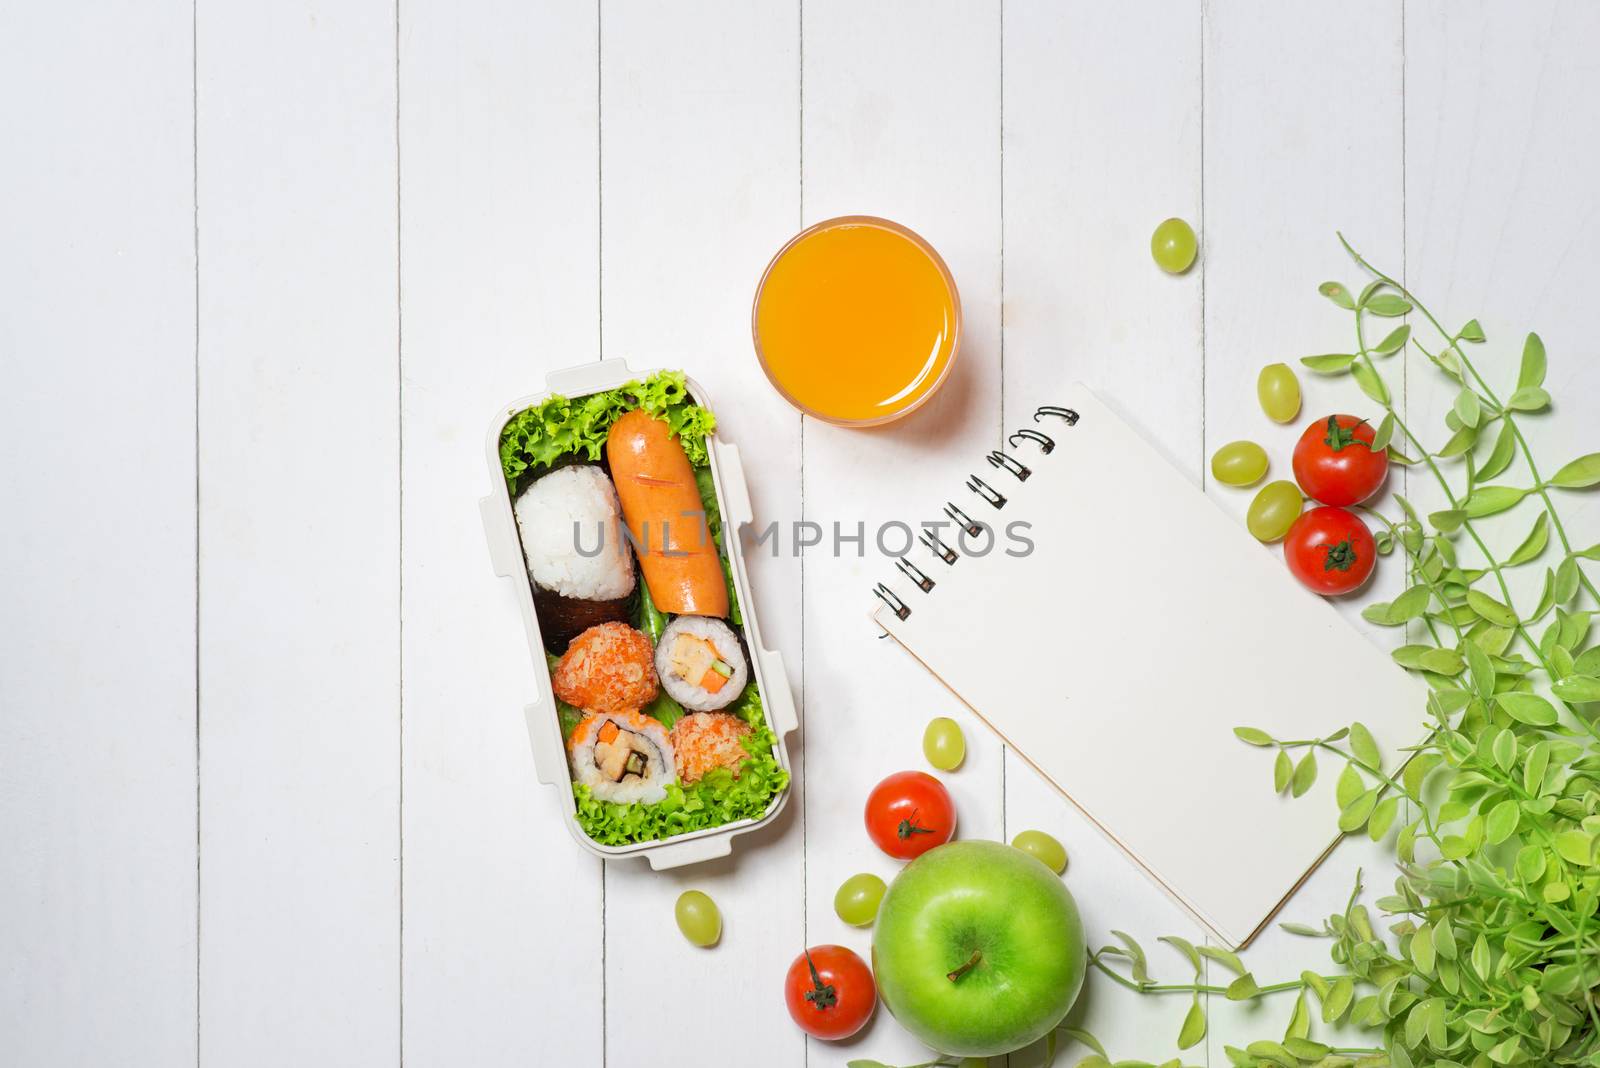 Bento box with different food, fresh veggies and fruits. Notebook with copyspace.